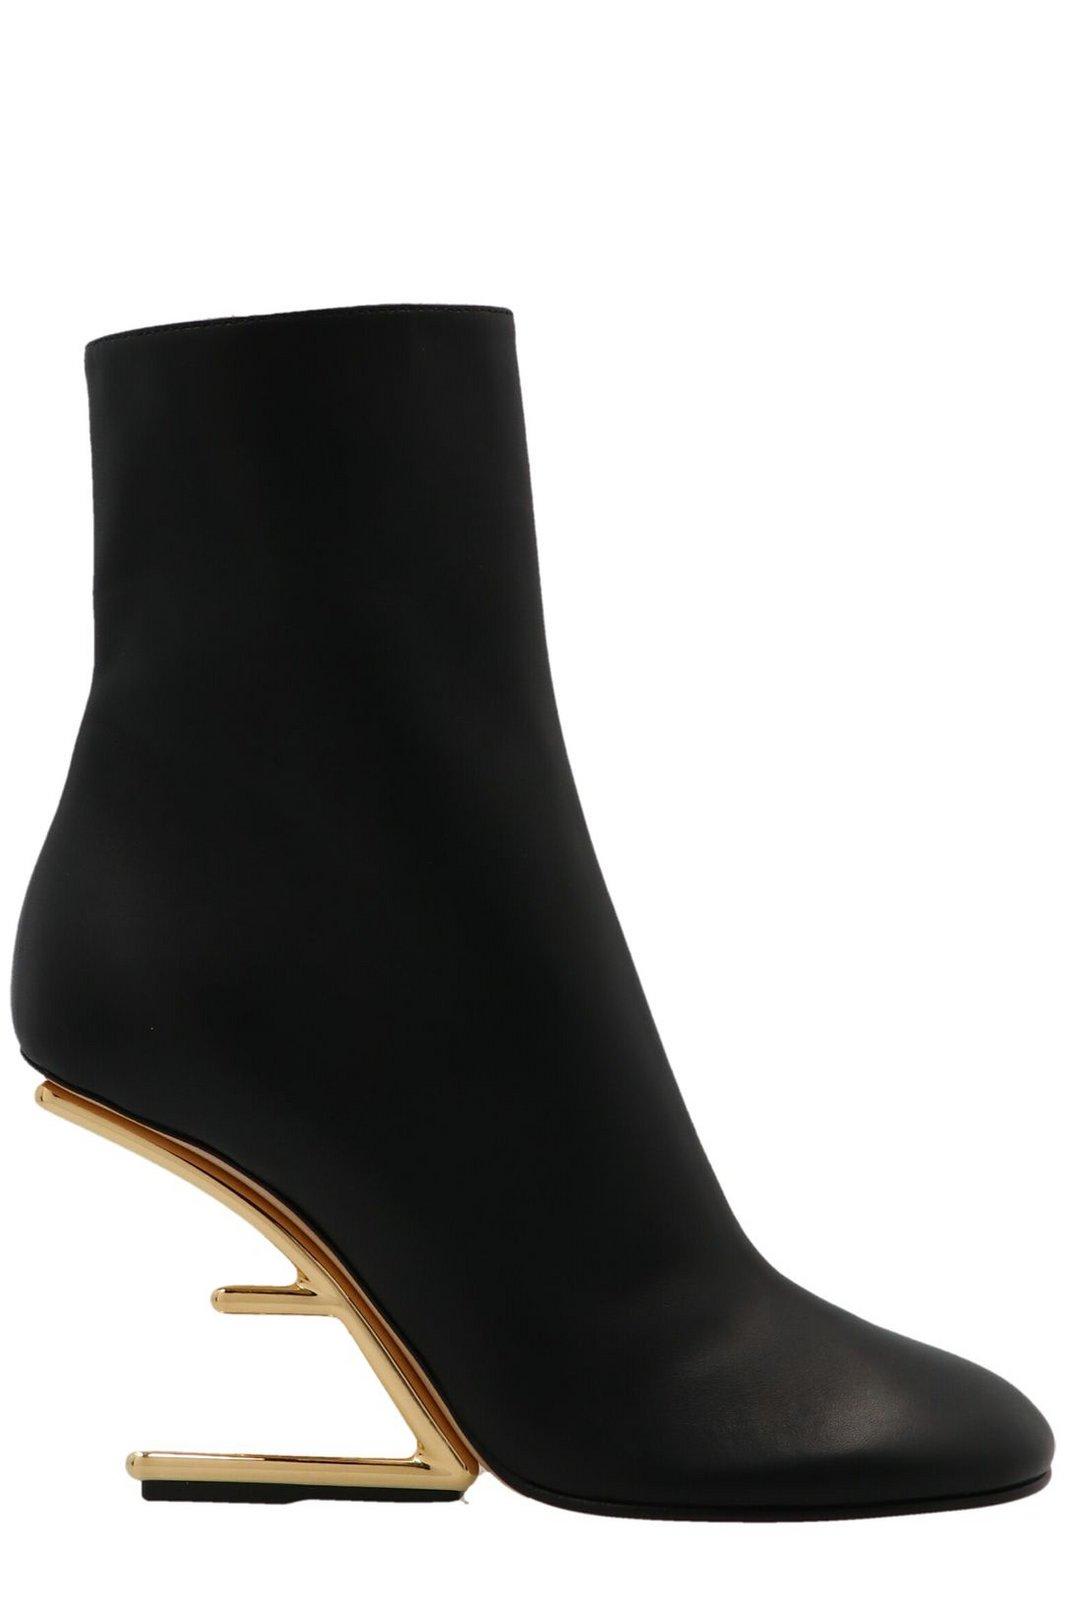 Fendi First Round Toe Ankle Boots